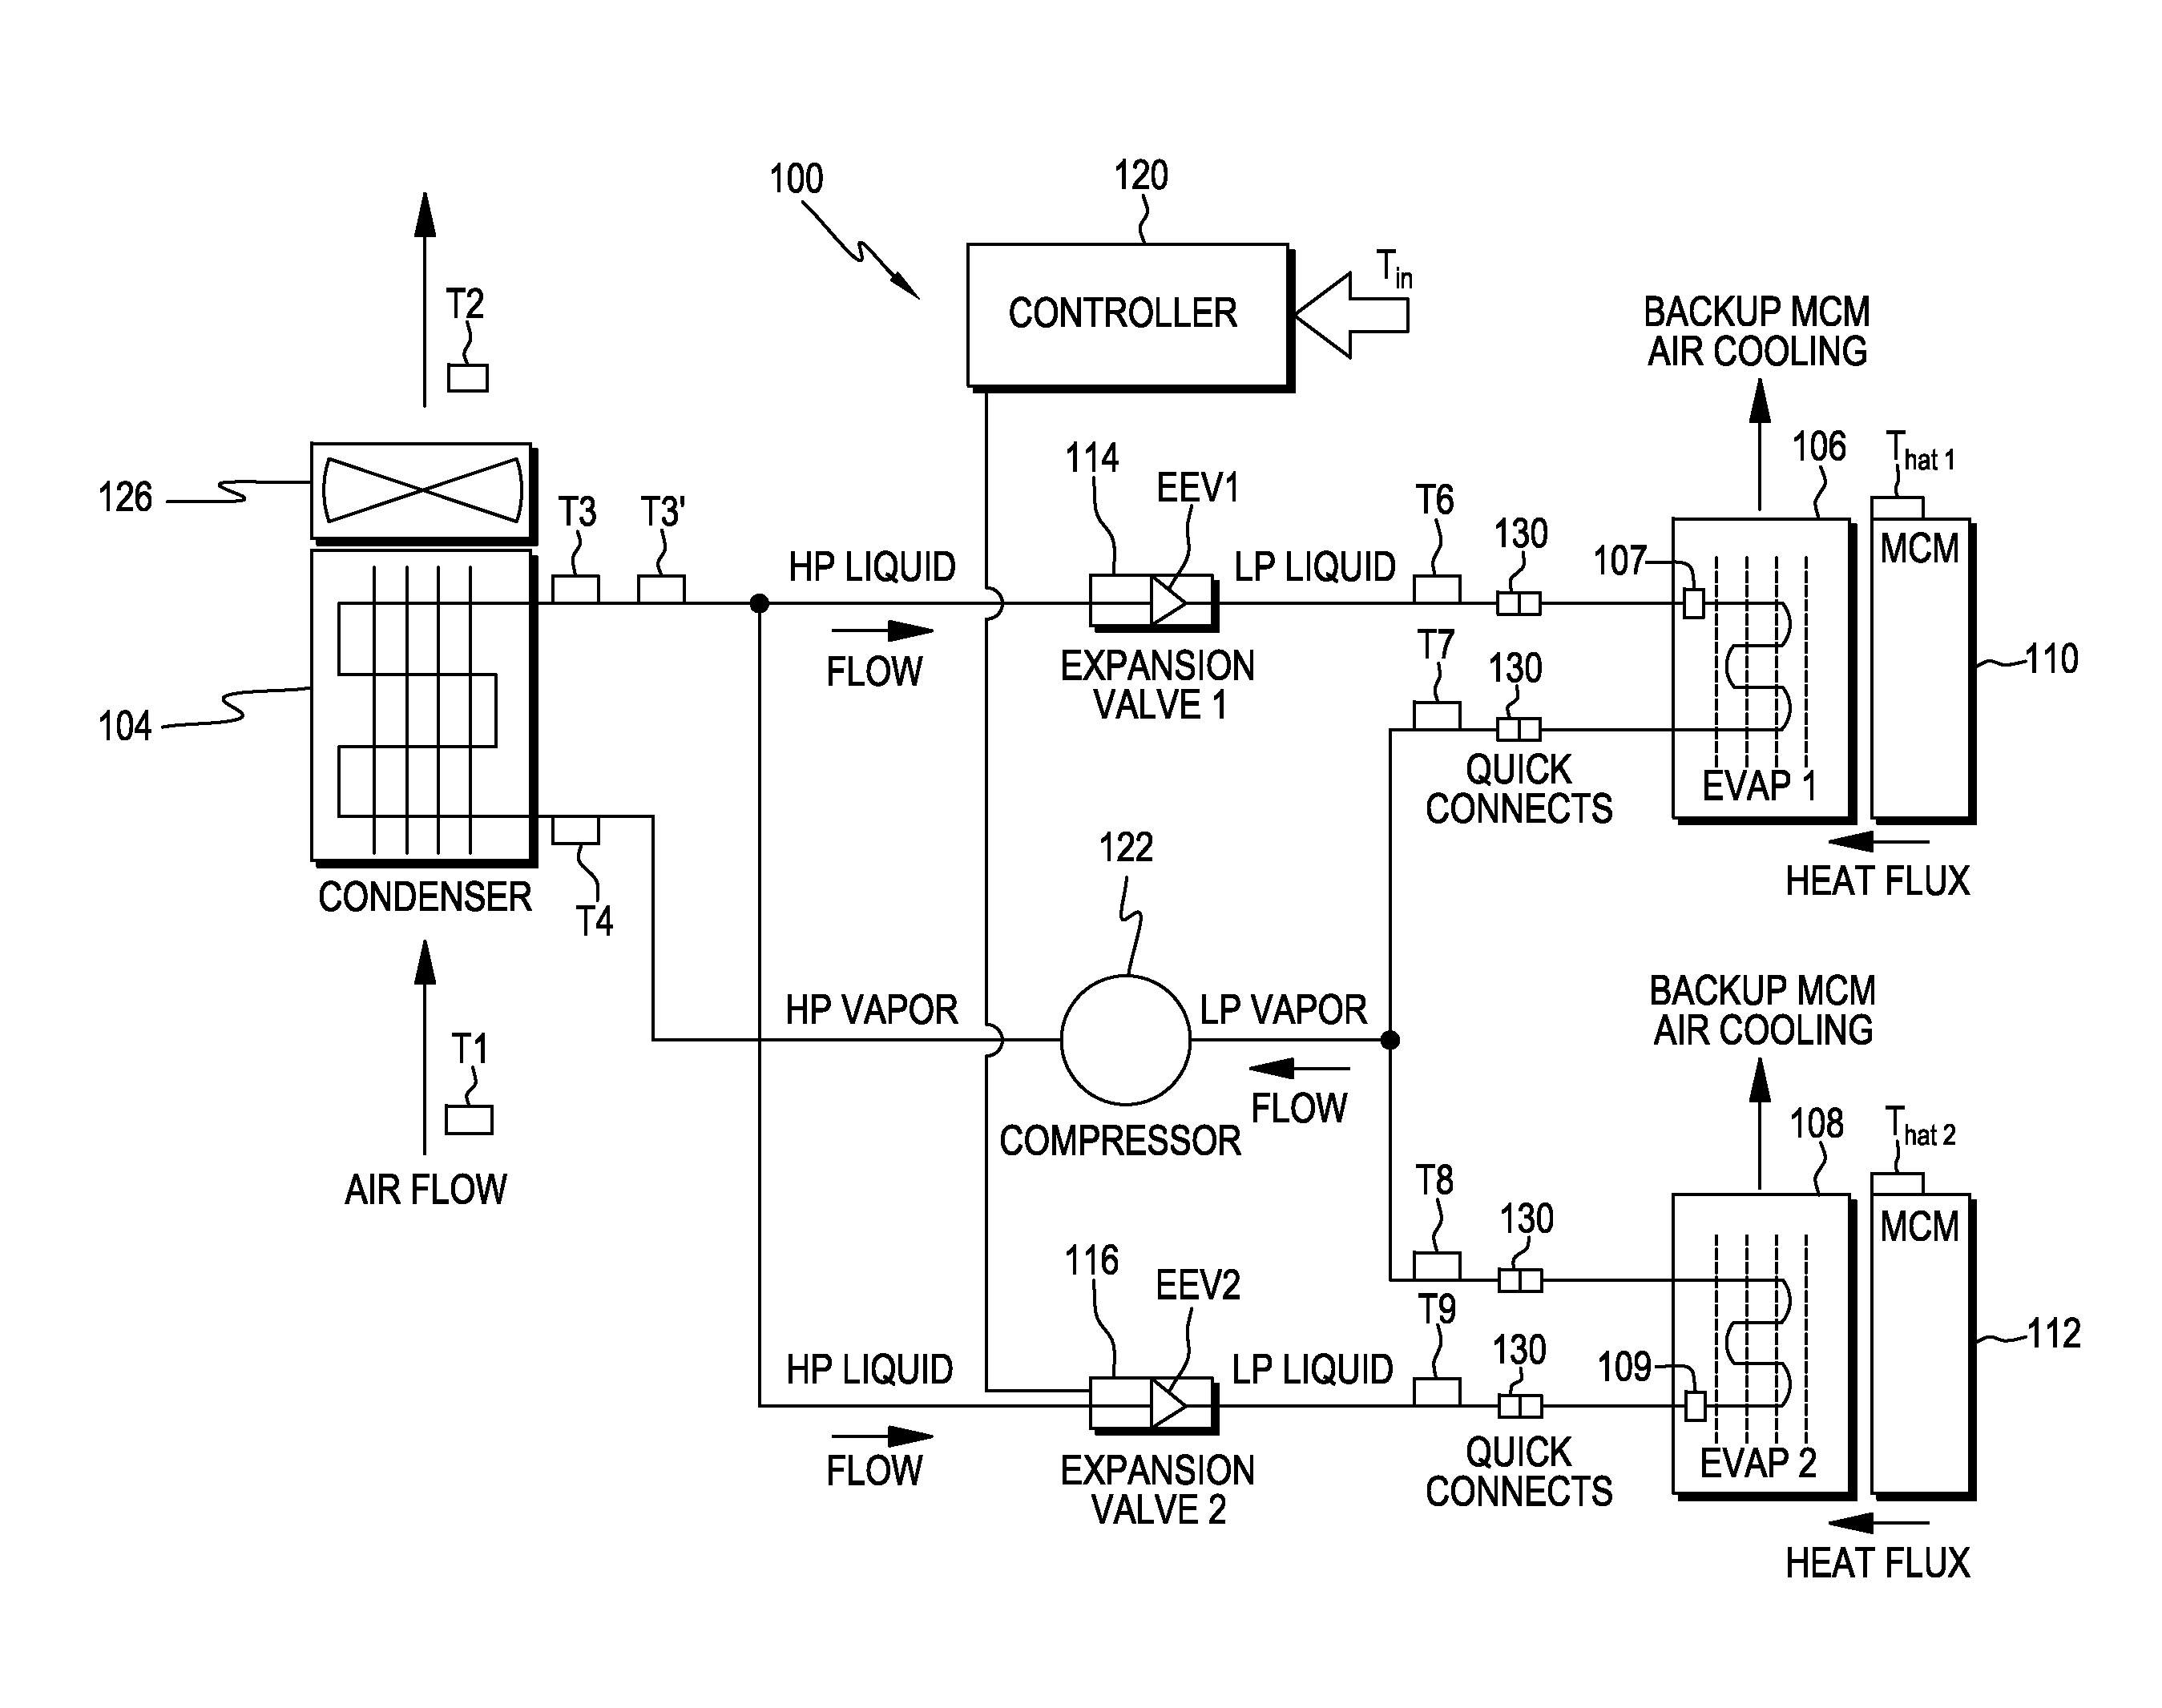 Cooling system control and servicing based on time-based variation of an operational variable